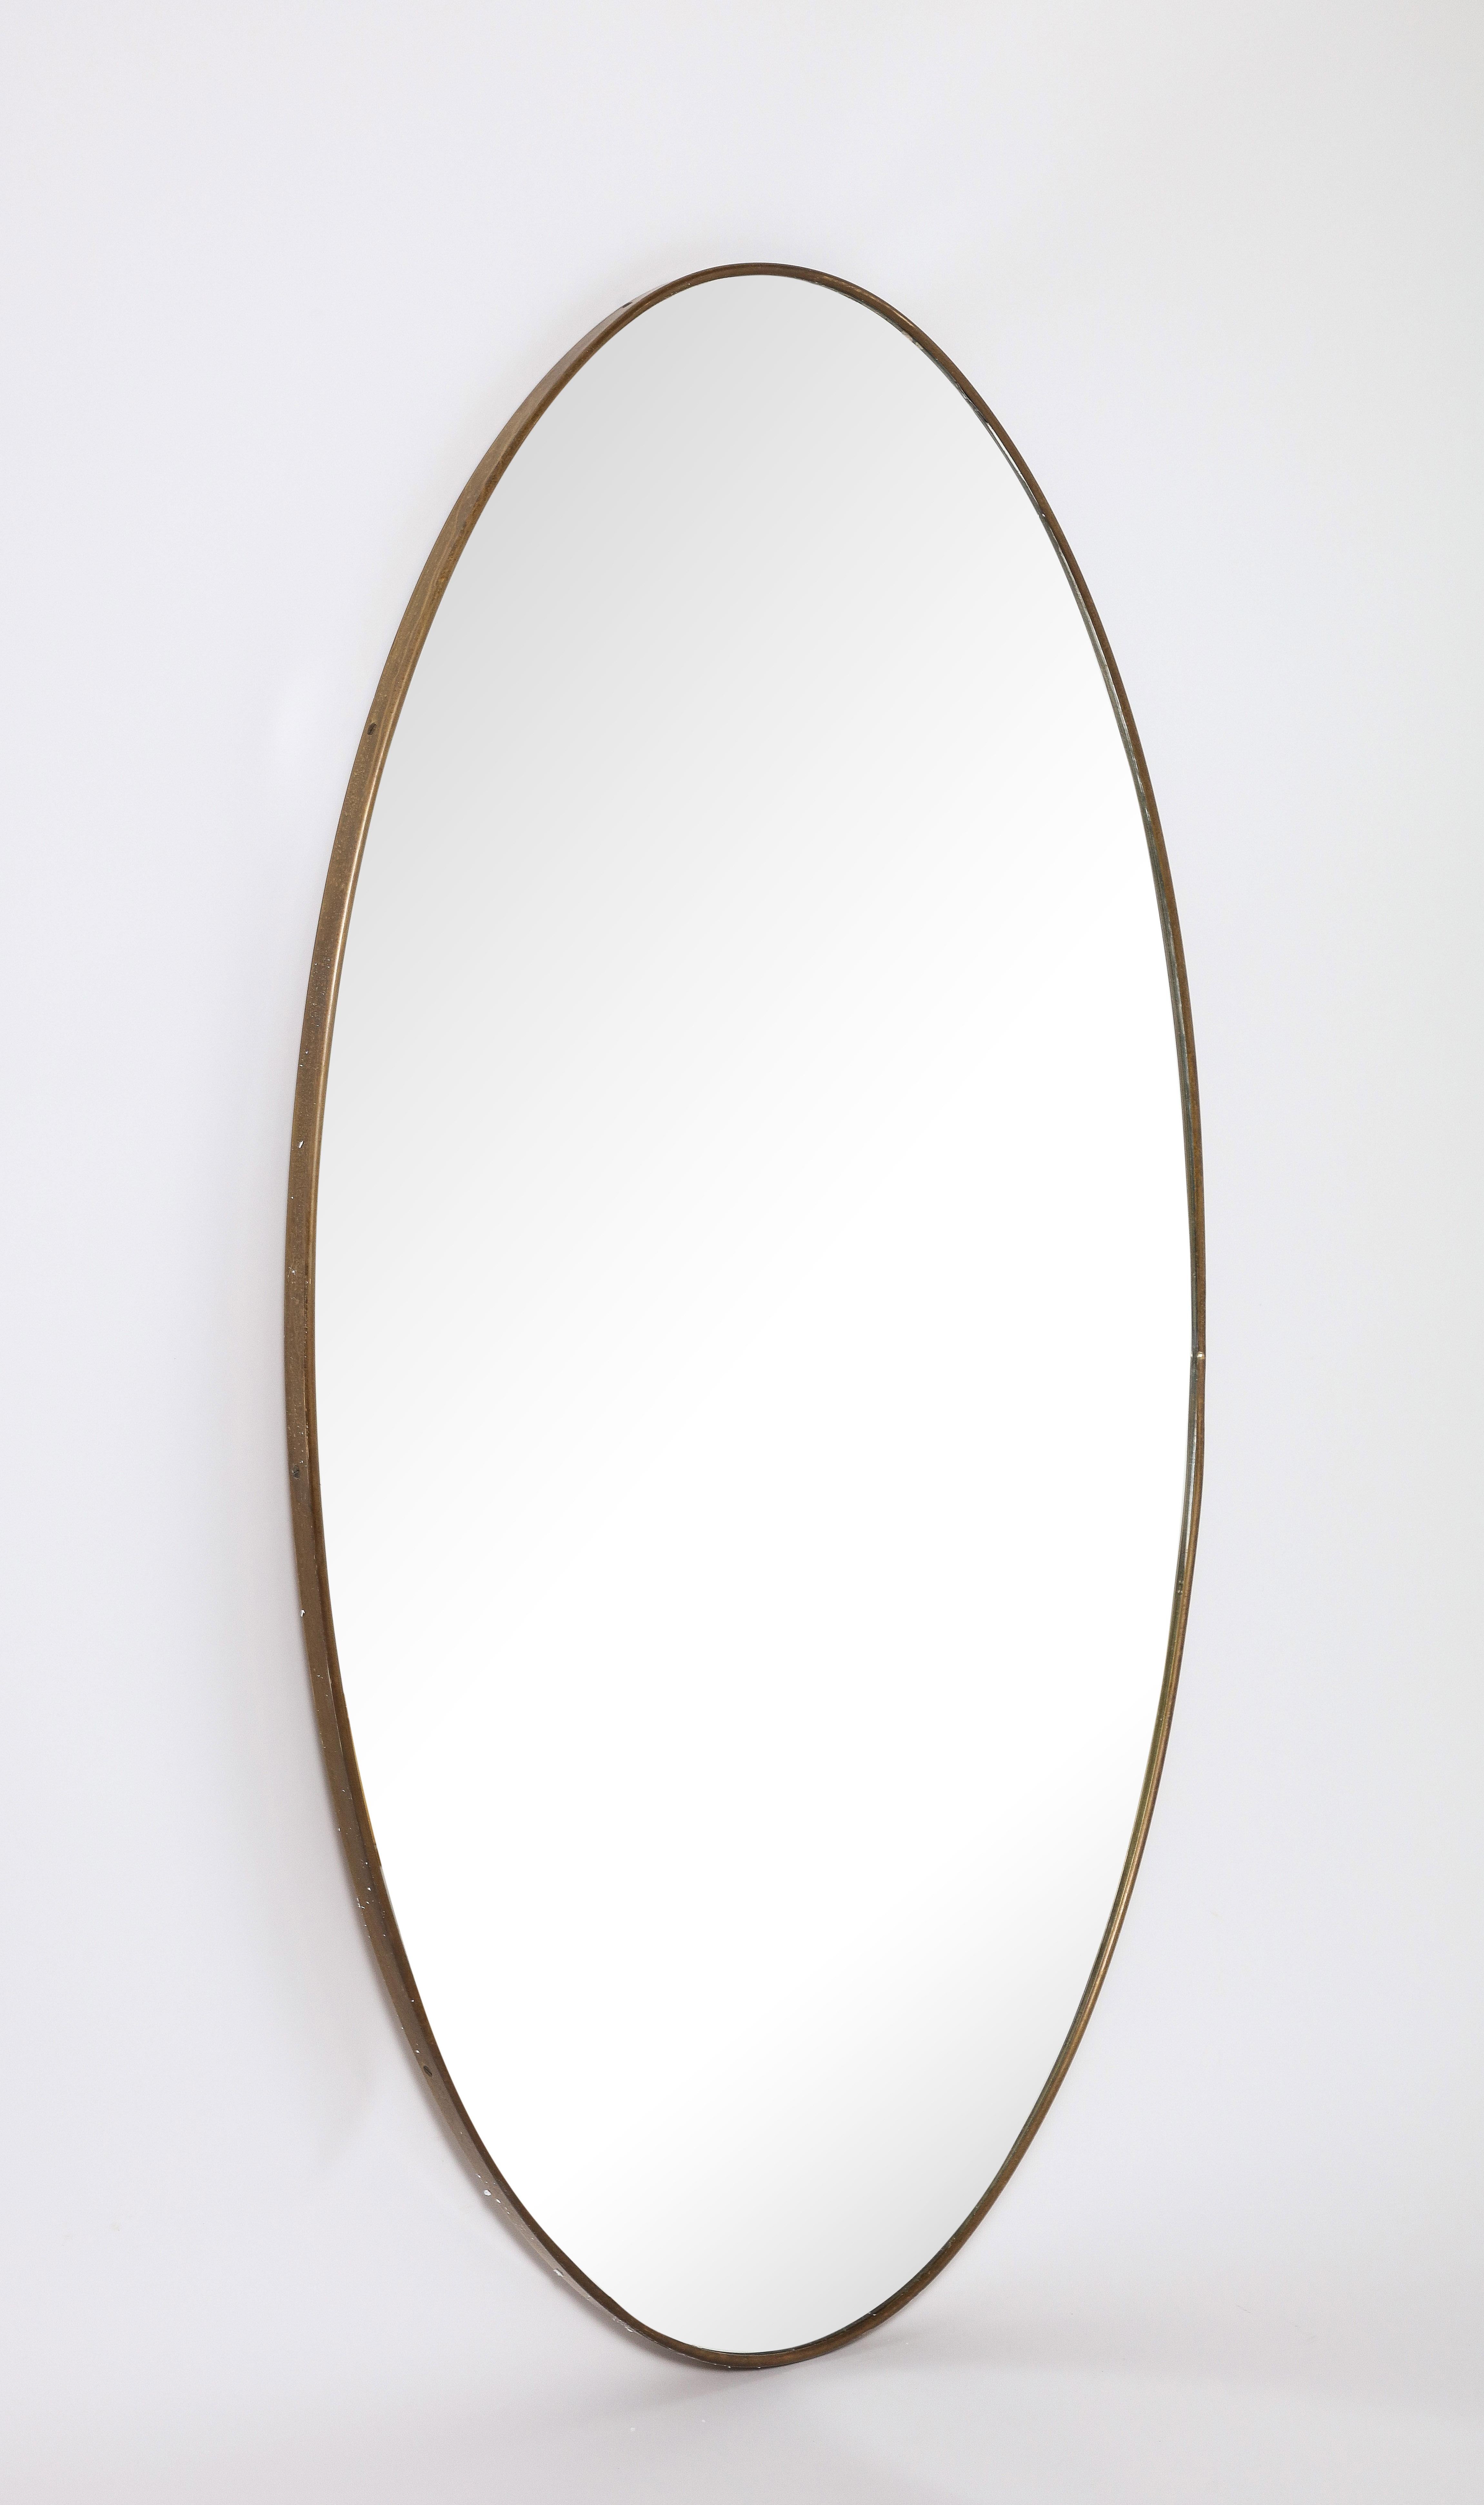 Italian Modernist oval brass grand scale mirror; a wonderful shape, the brass with original warm and rich patina. Original mirror glass plate. 
Italy, circa 1950 
Size: 49